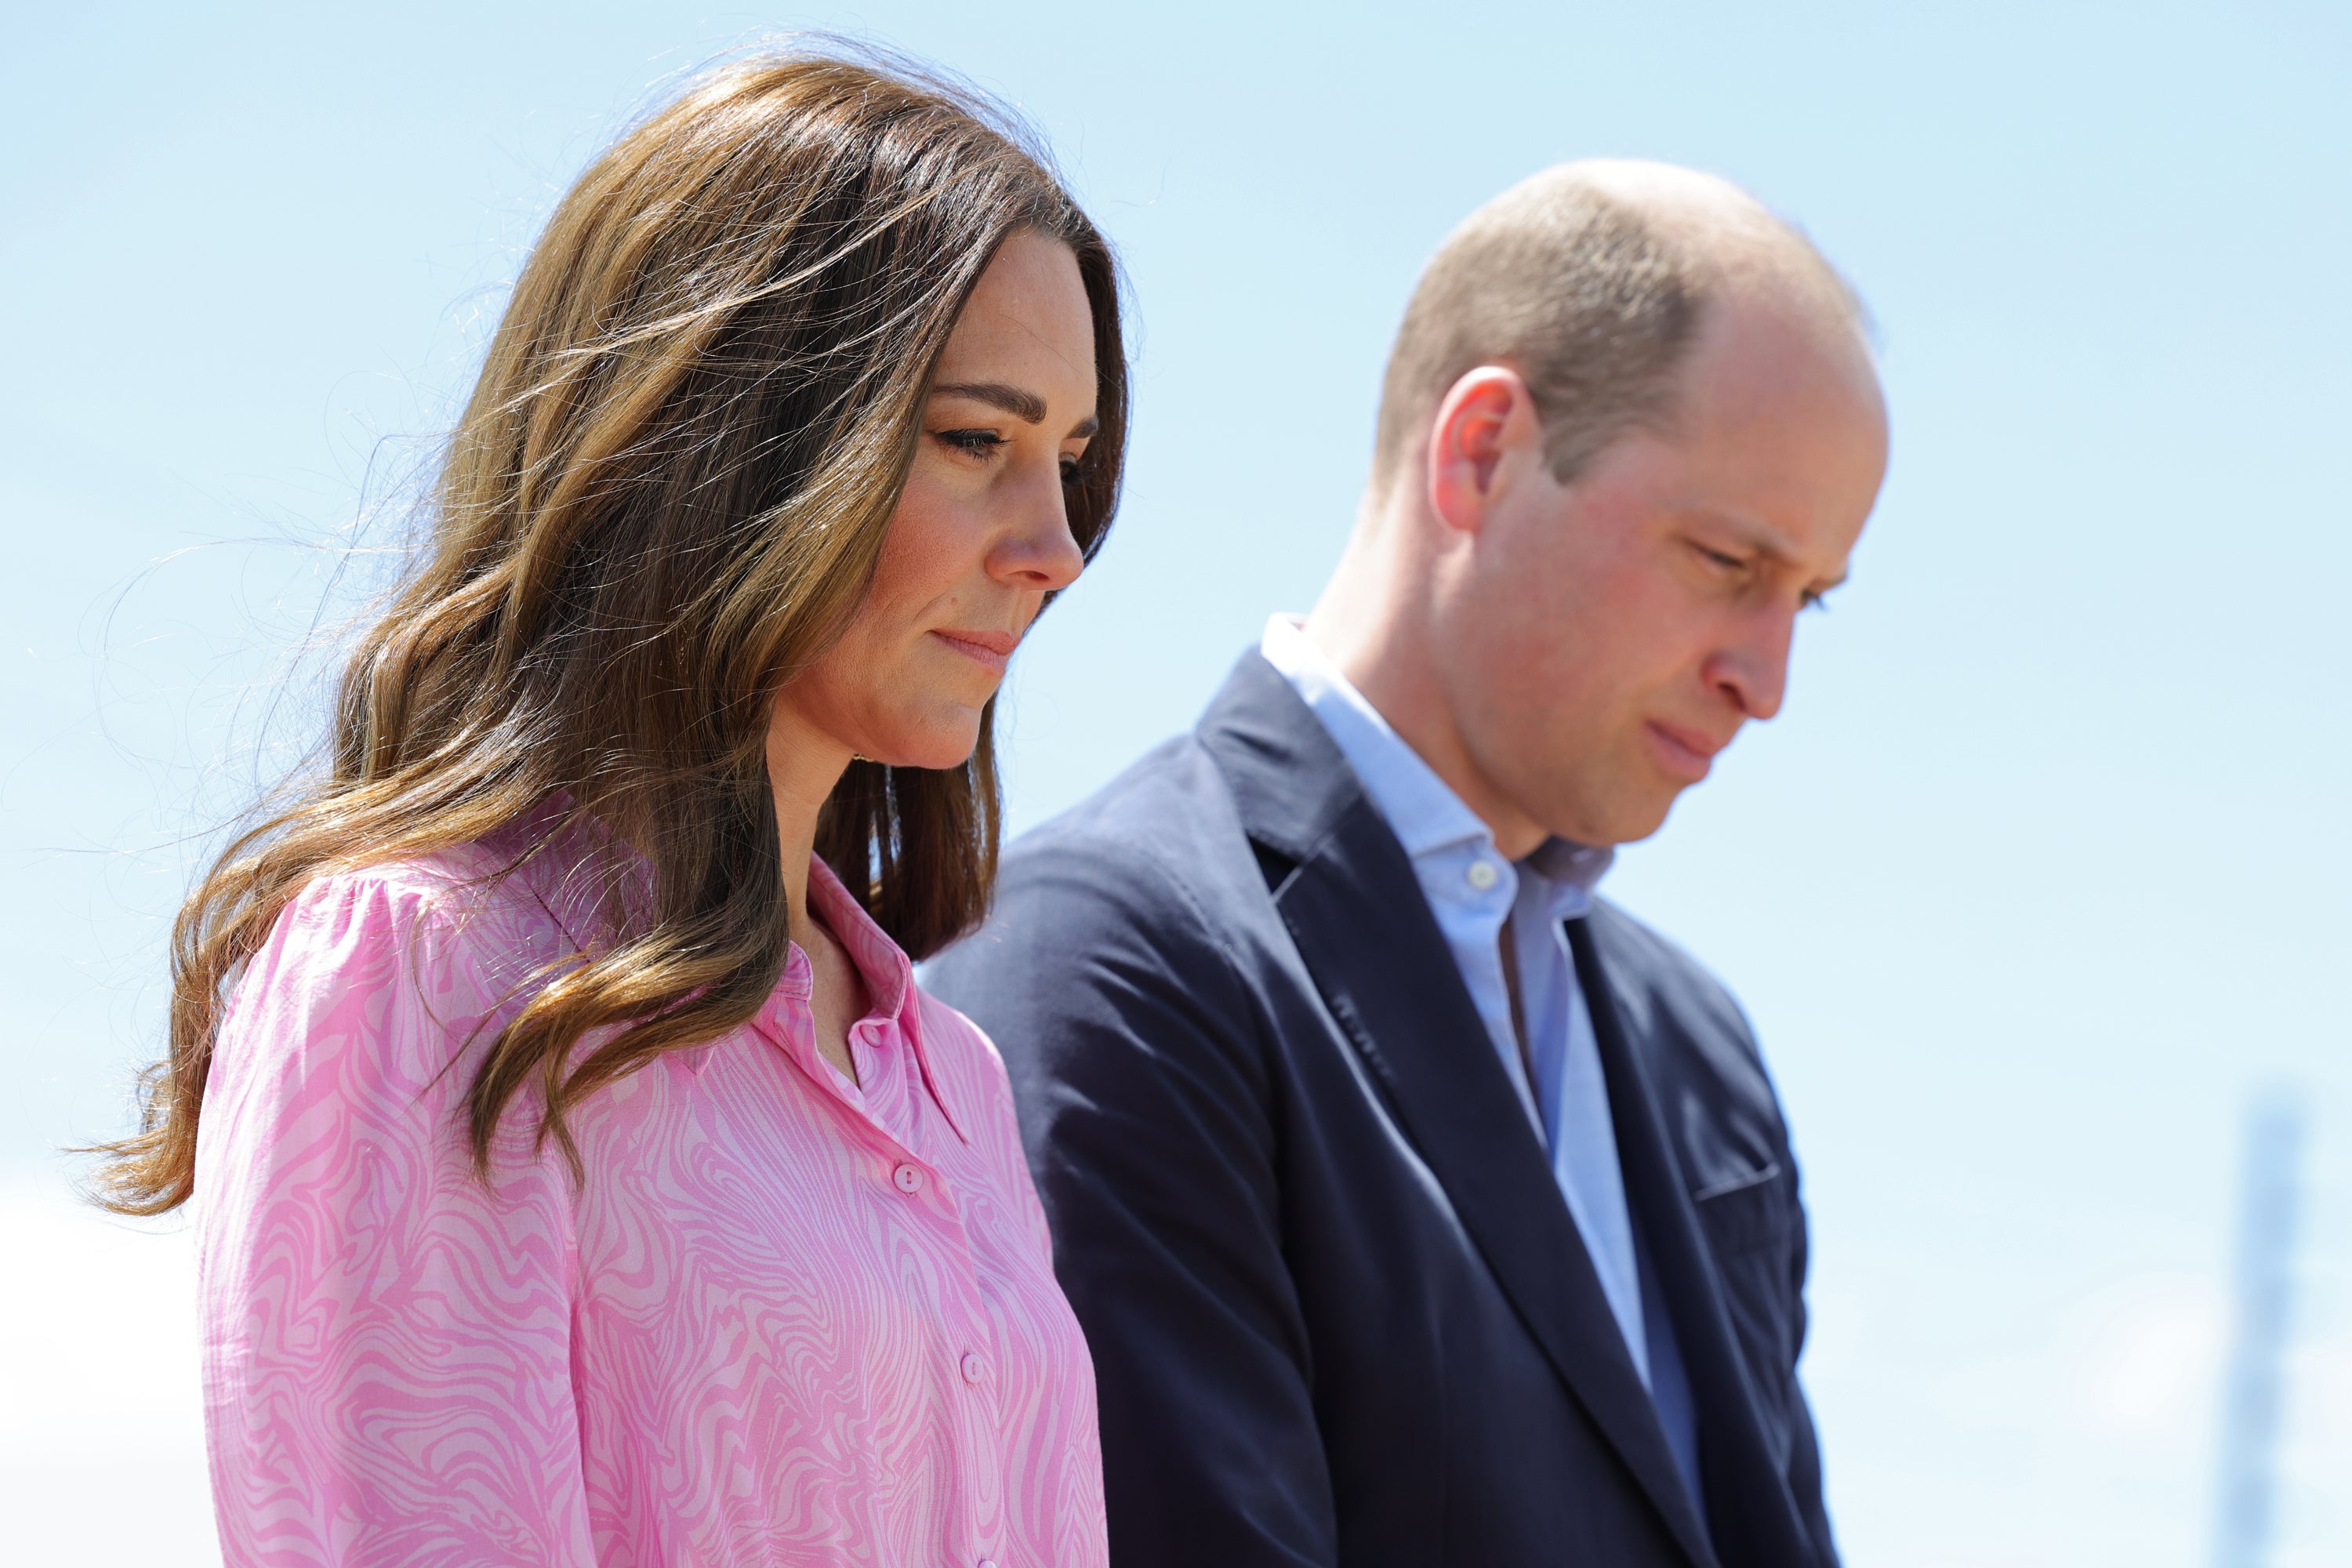 The Duke and Duchess of Cambridge during a visit to a Fish Fry in Abaco, Bahamas